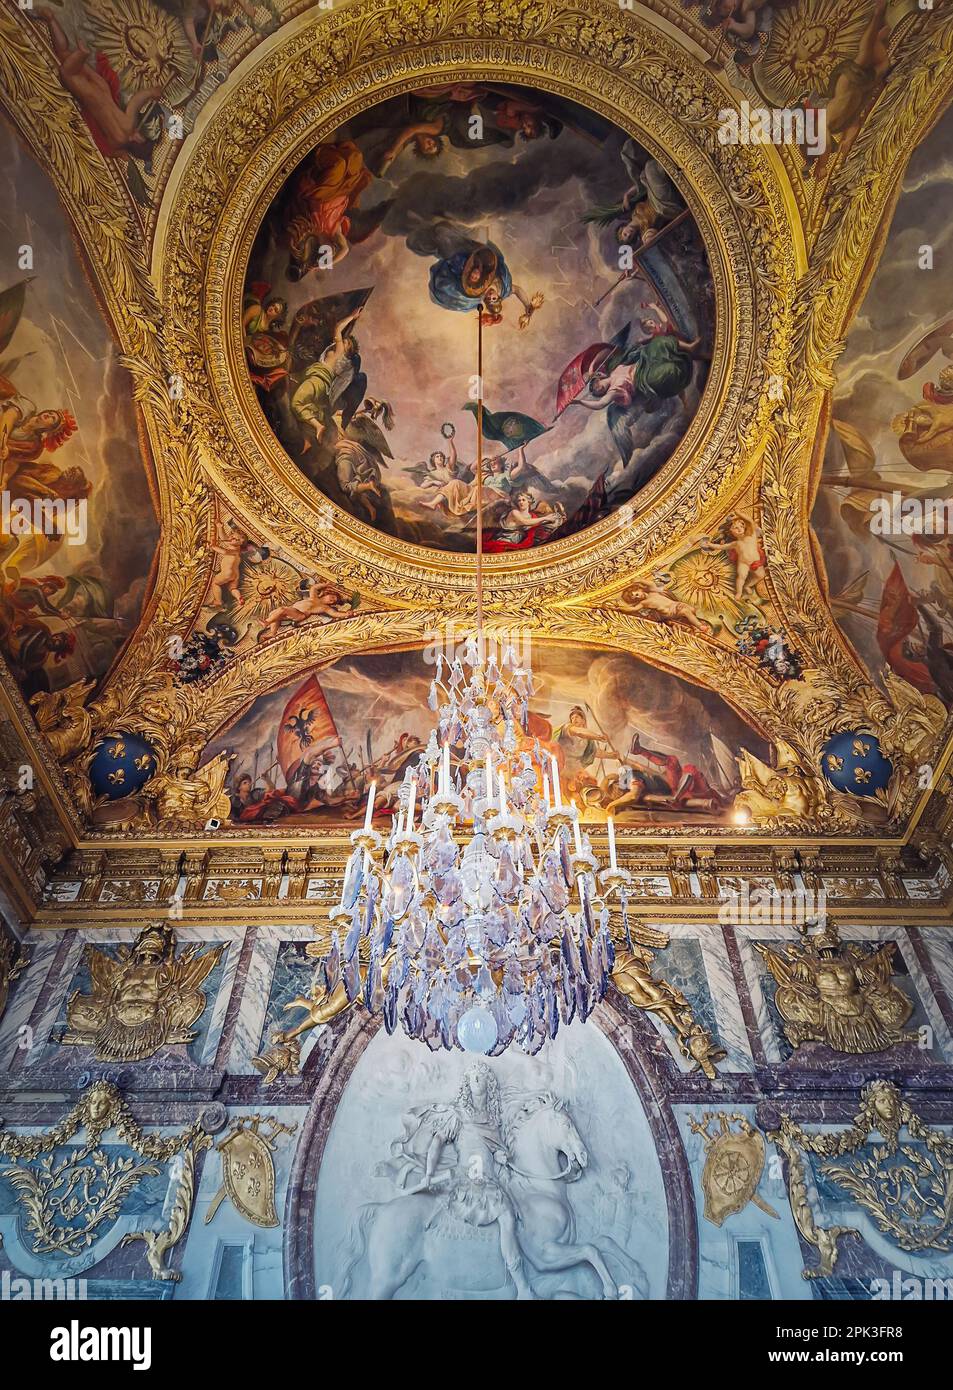 The War Room, Palace of Versailles, France. Chandelier hangs out of the golden painted ceiling above the stucco medallion of Louis XIV on horseback Stock Photo